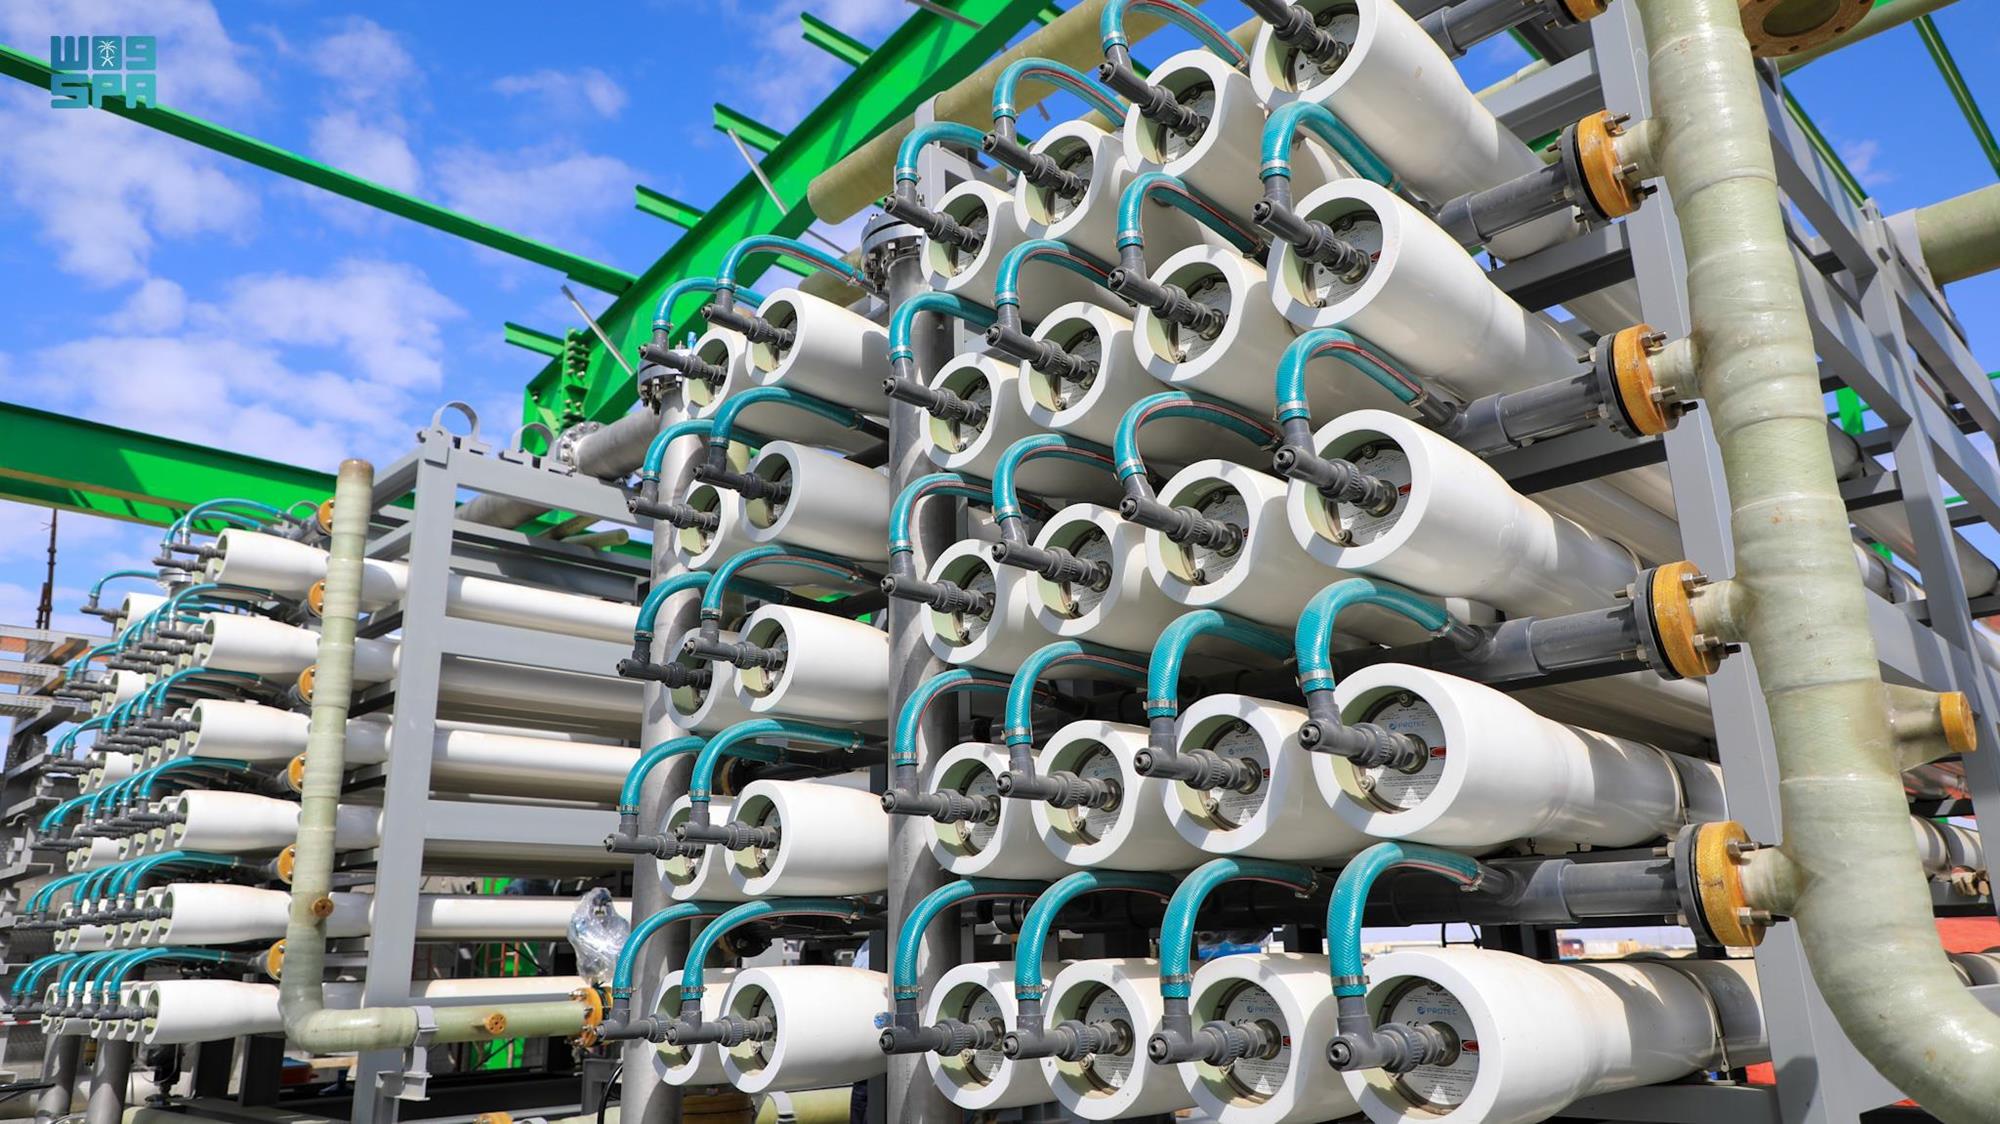 Desalination systems using reverse osmosis